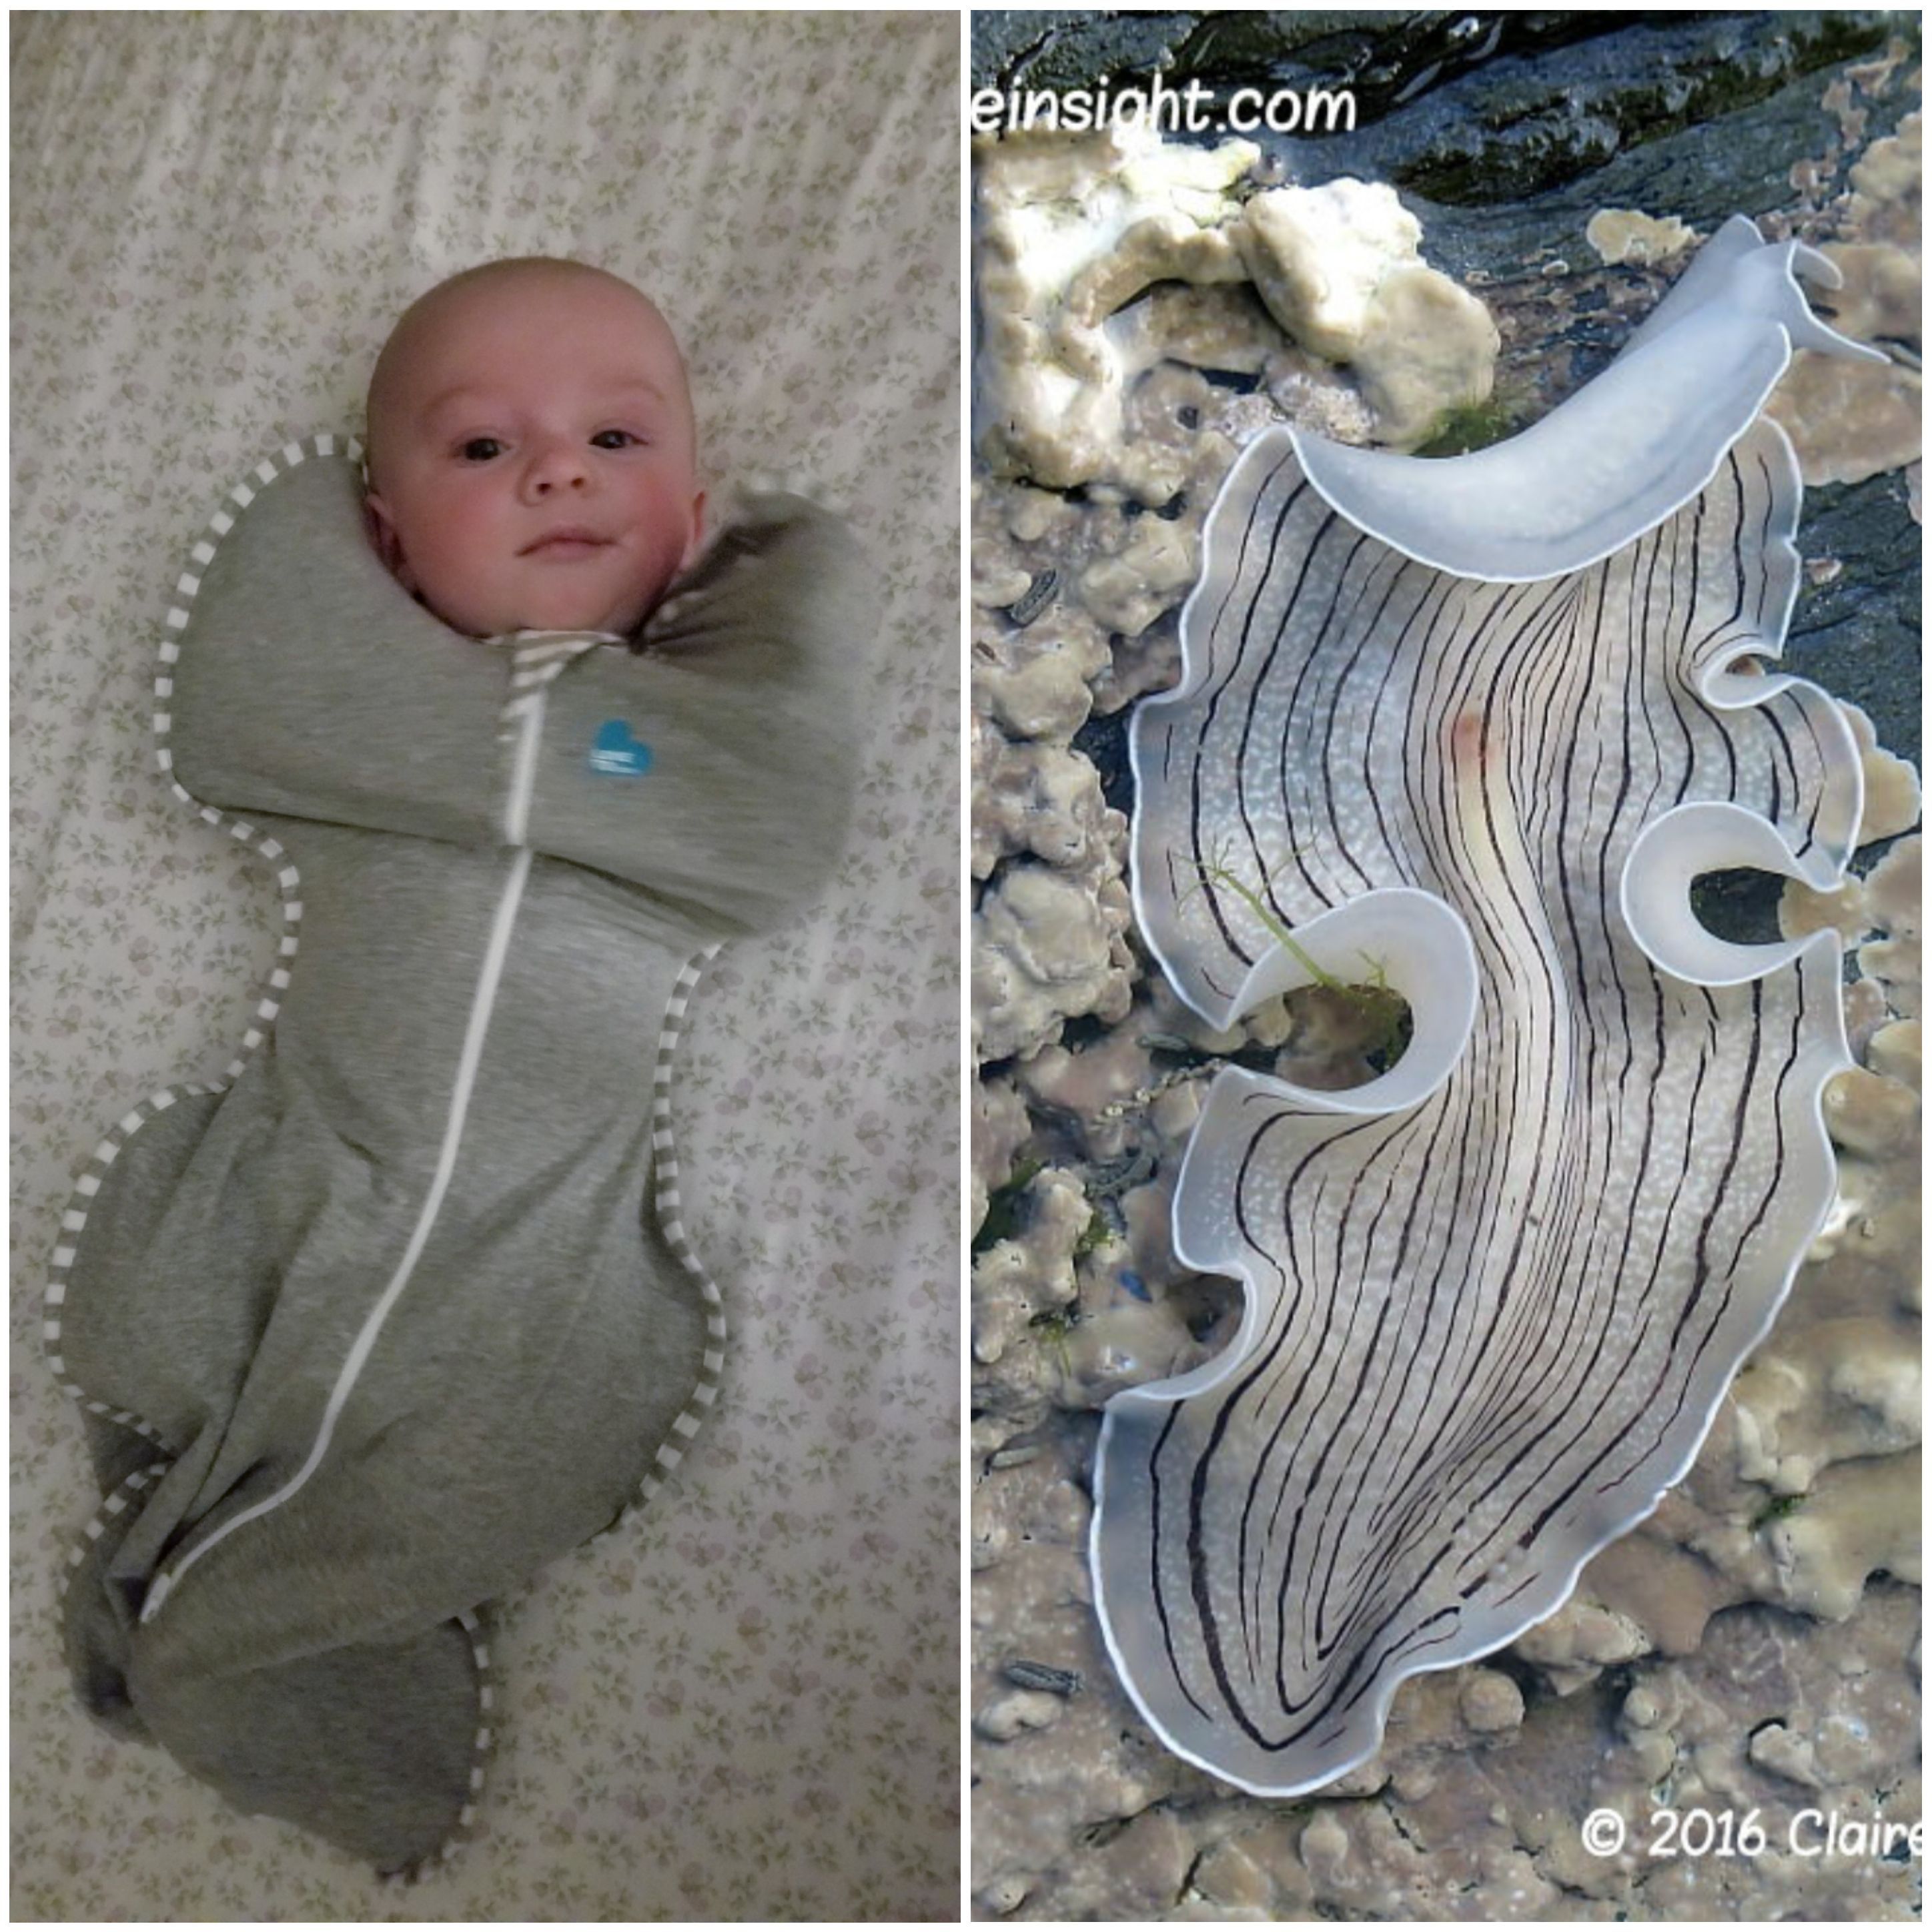 My son's new swaddle looks like a flatworm. His name is Atlas so I'm calling him Flatlas now.